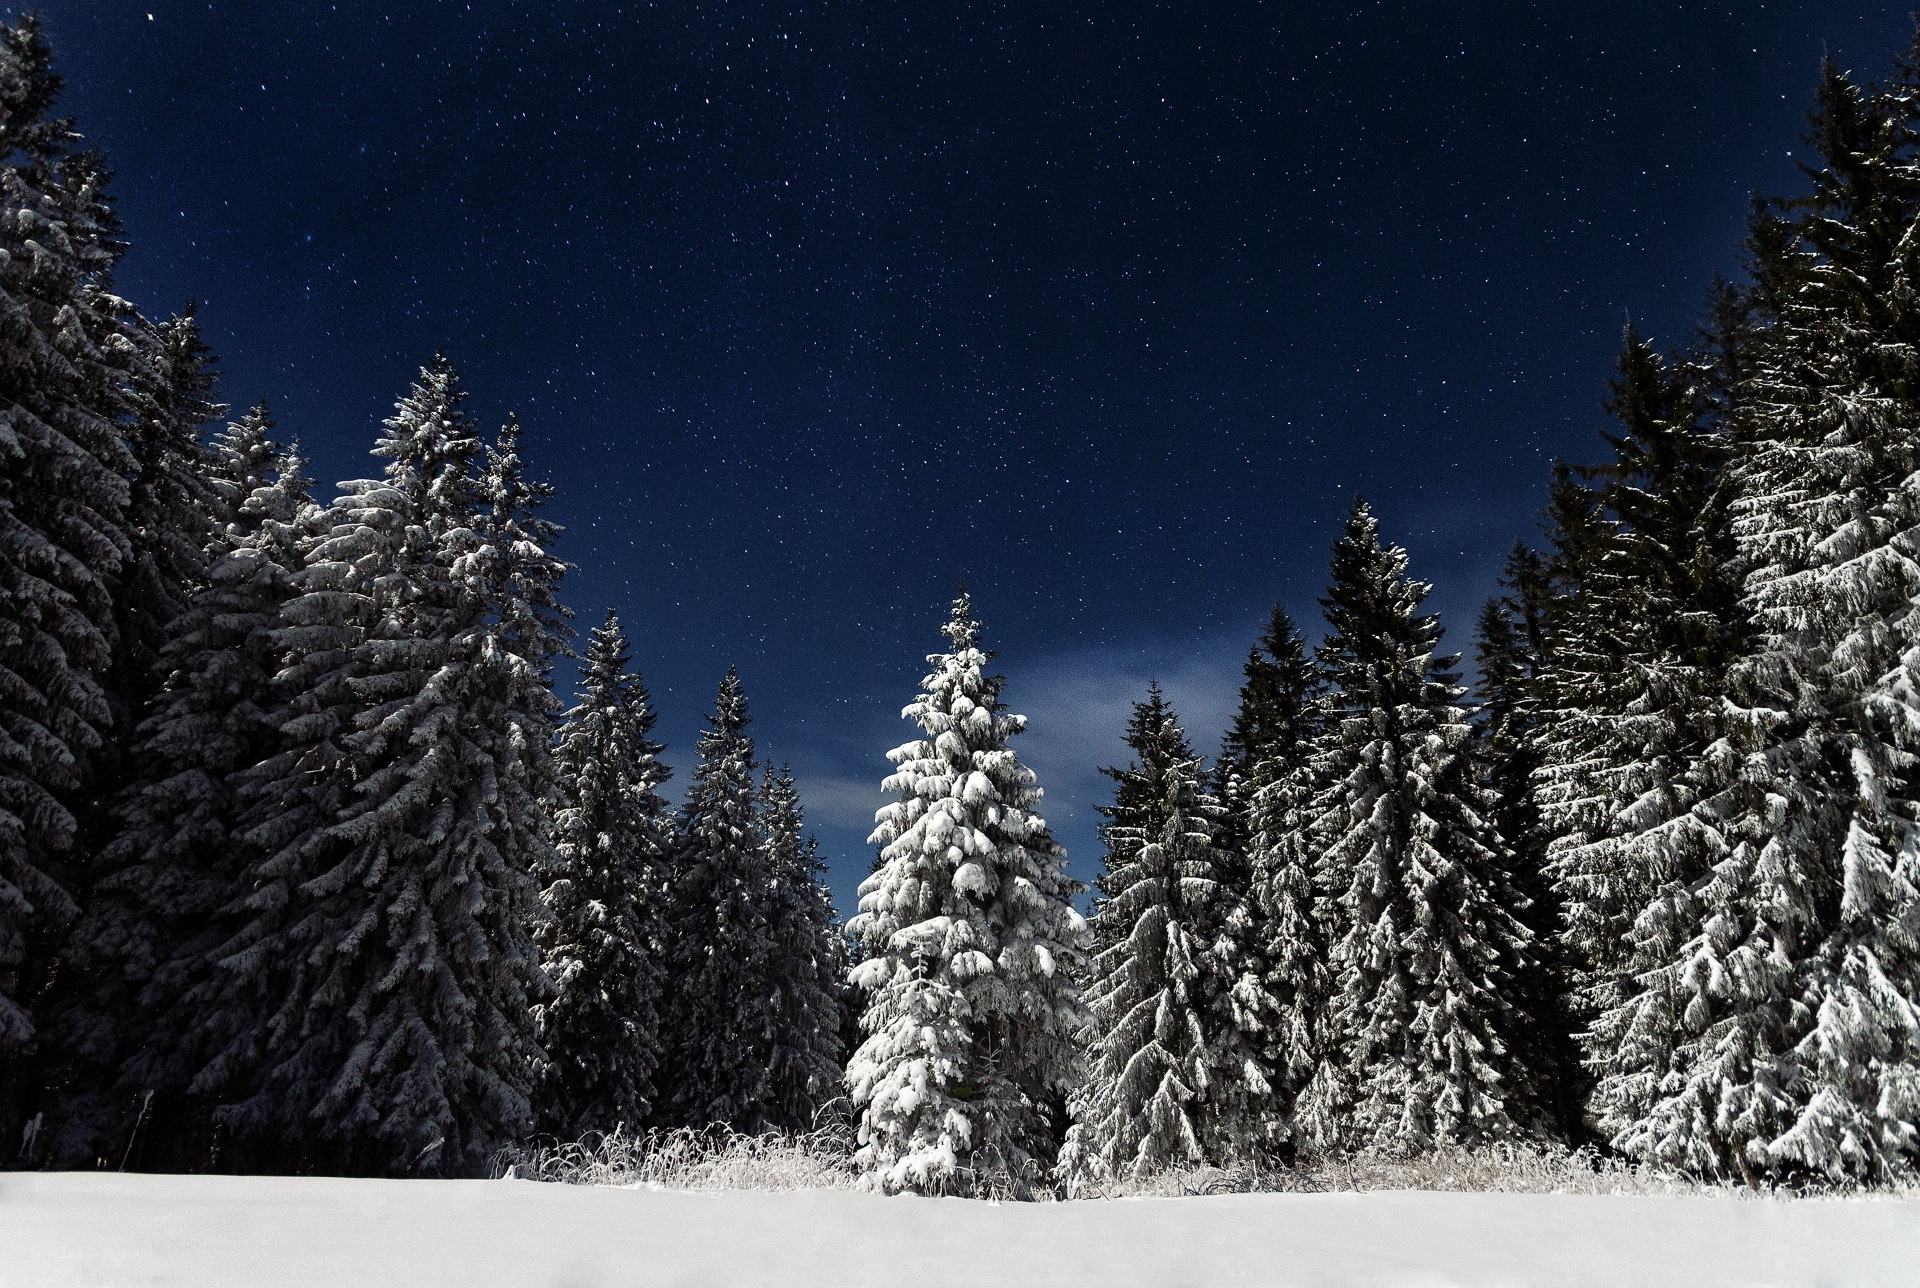 Snow-covered Christmas trees in the forest.